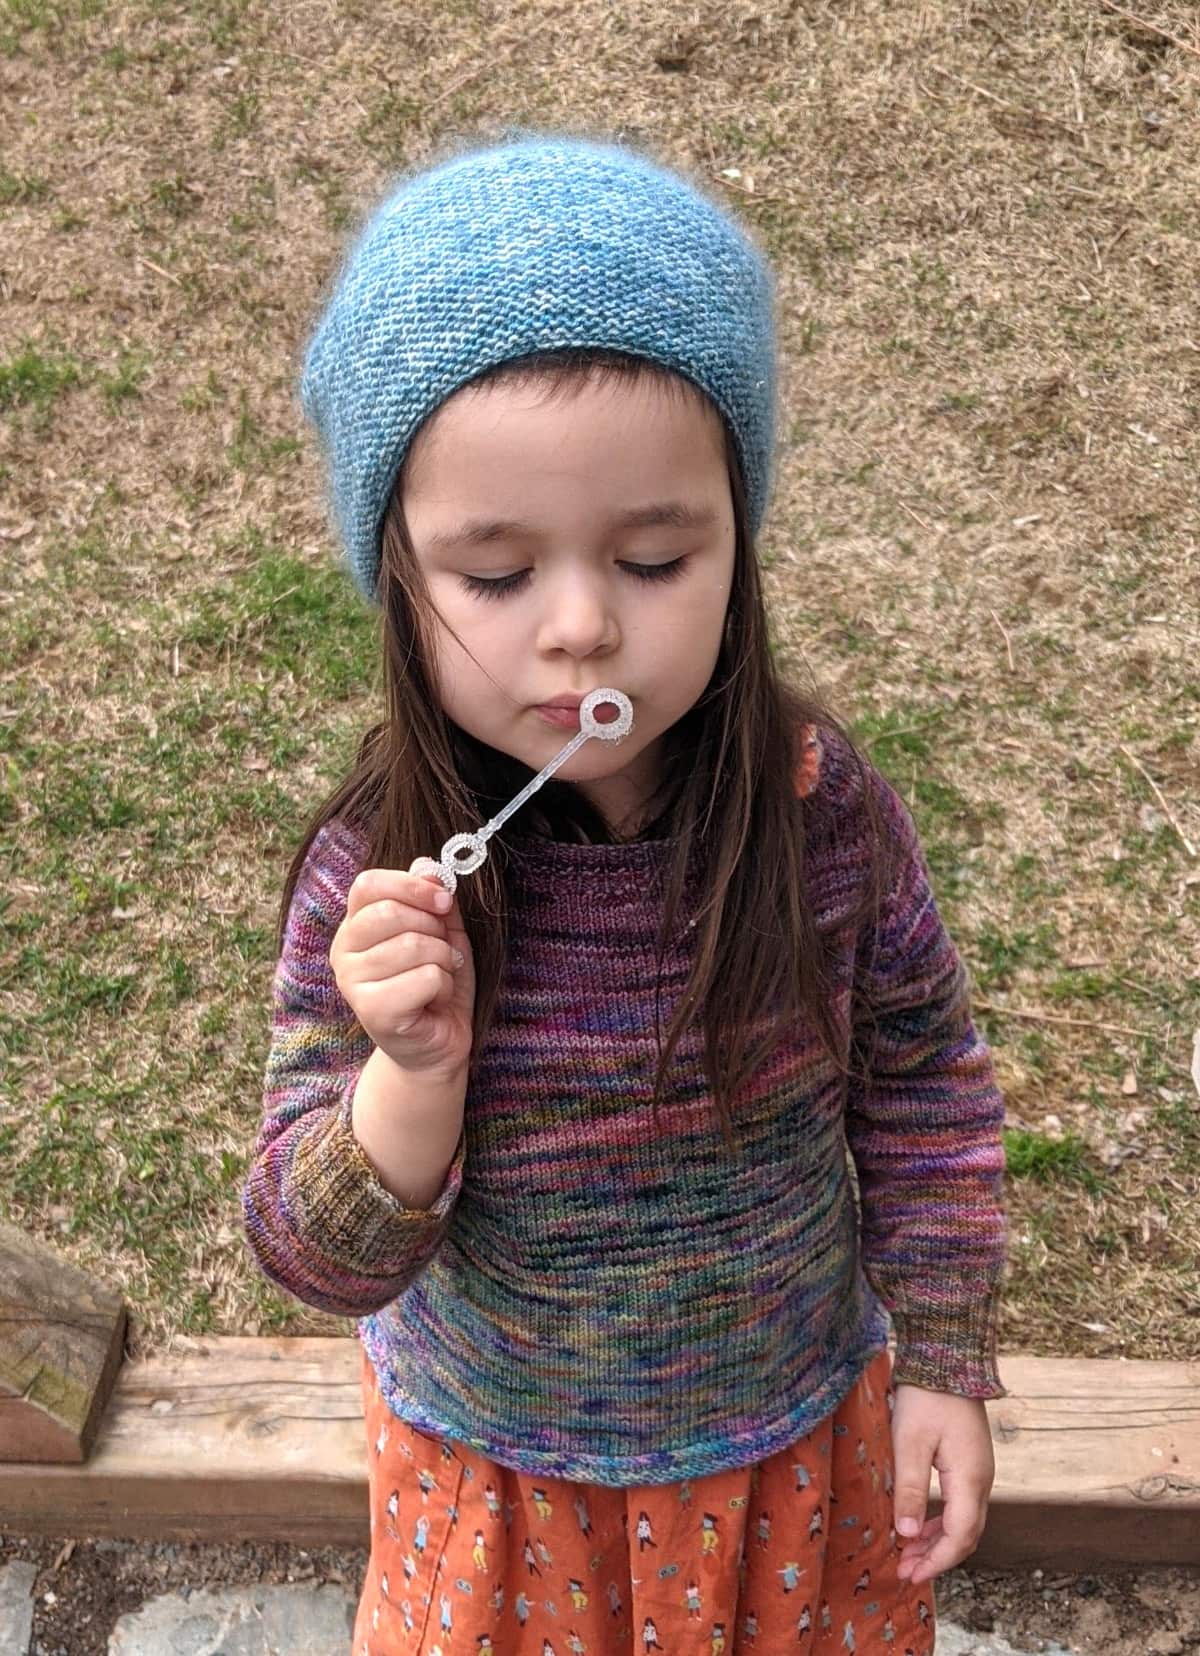 image description: a close-up version of the image to the left, a young child wearing a handknit hat and sweater, most of the background cropped out